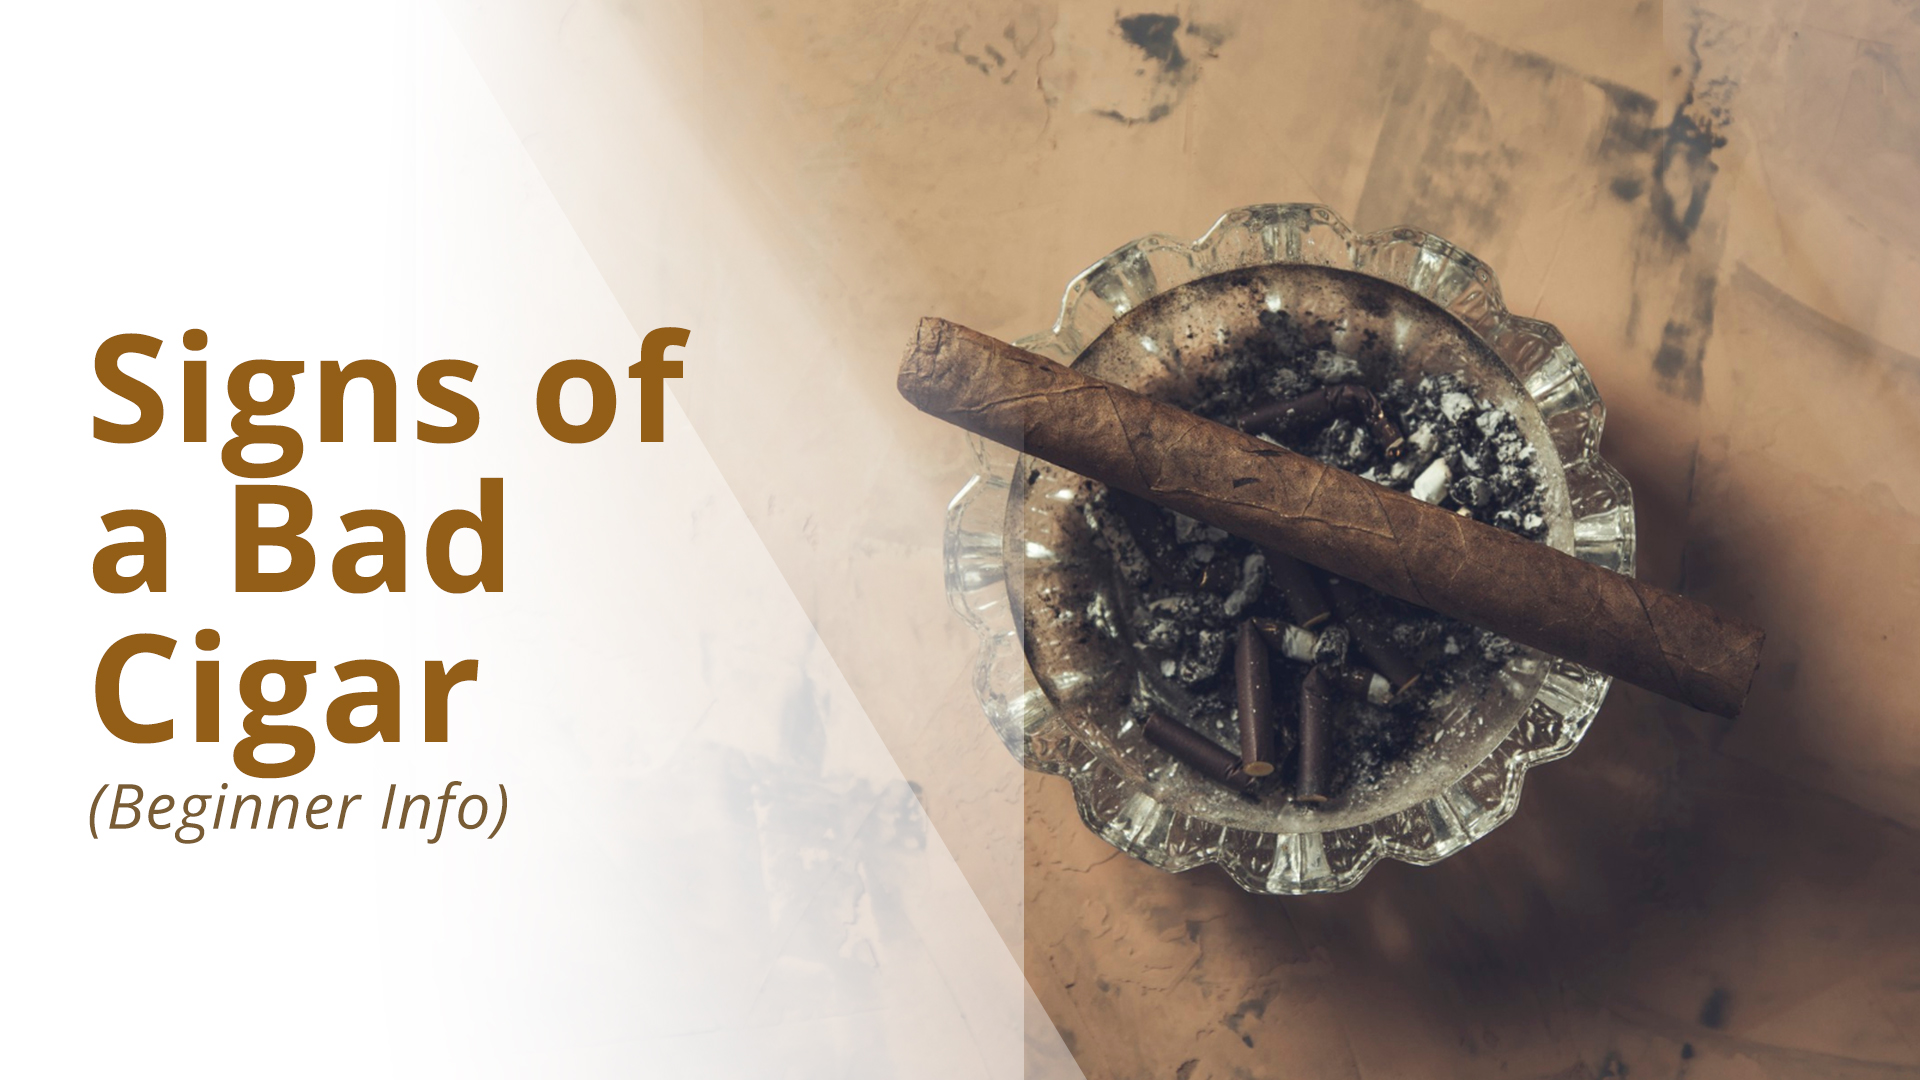 How to tell if a cigar is bad